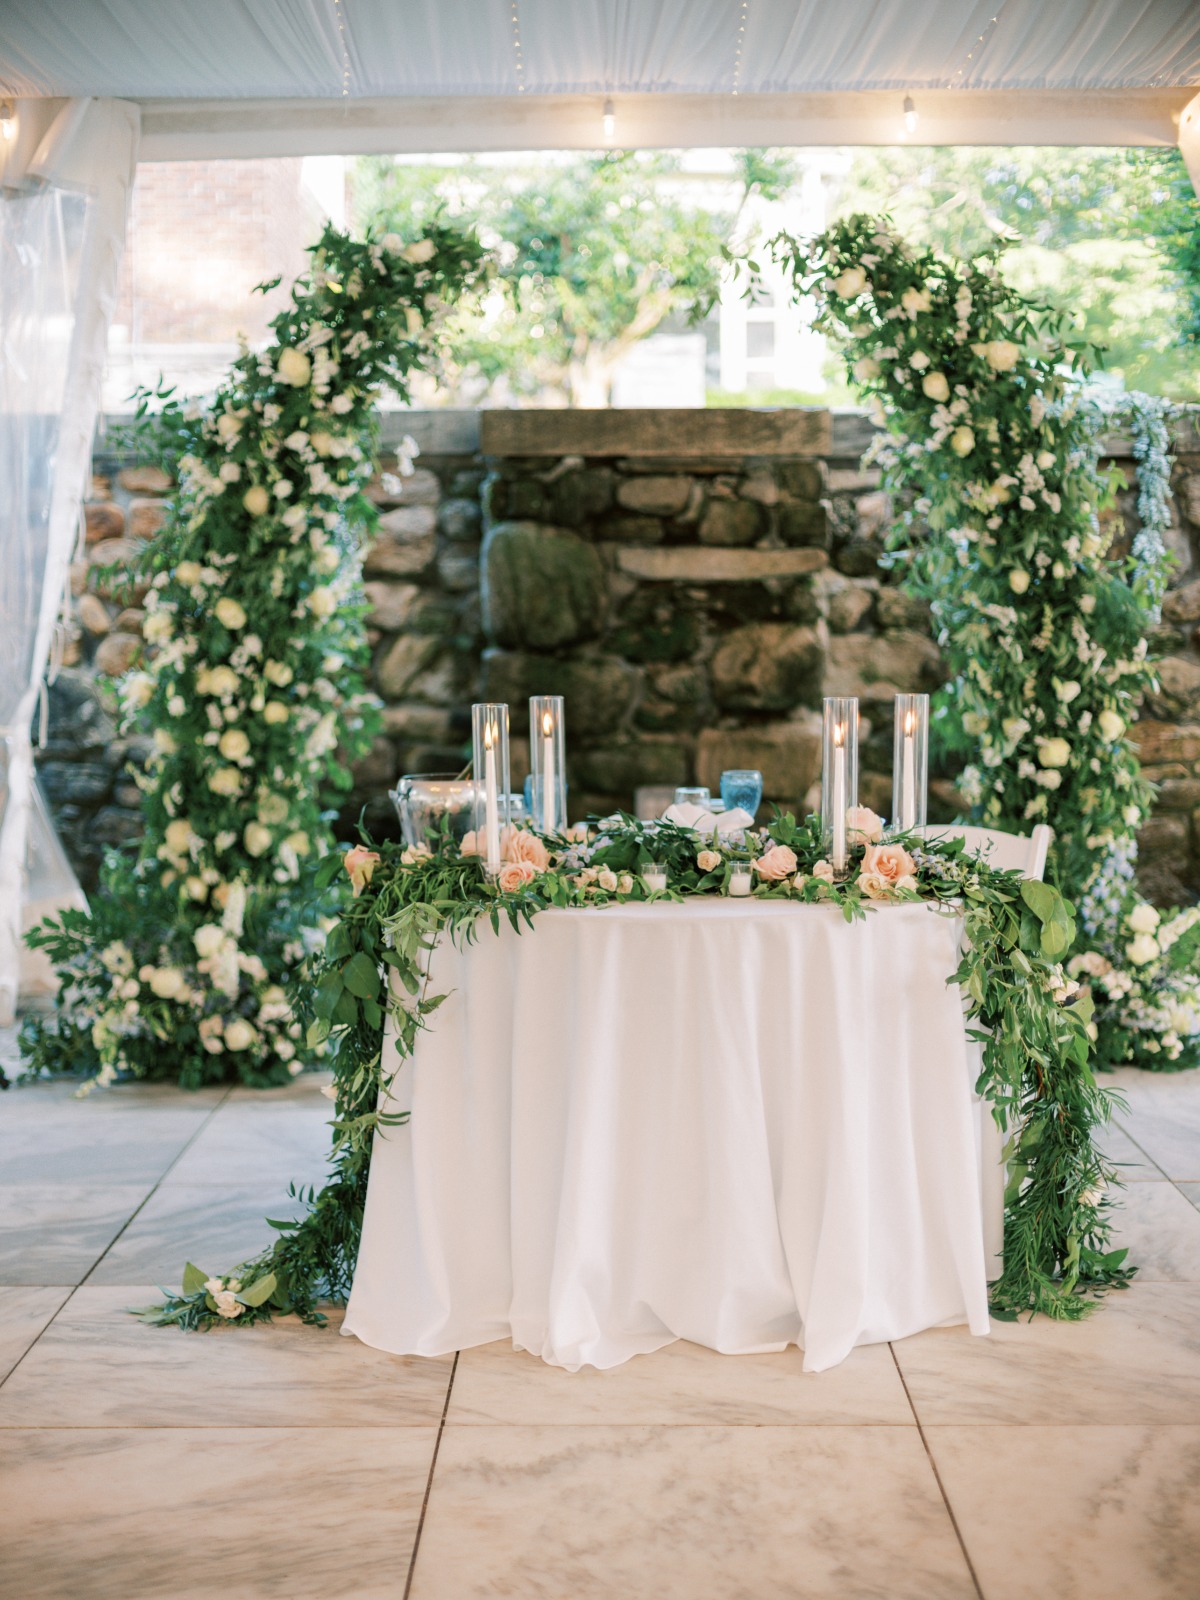 Elegant draping greenery covered sweetheart table for reception